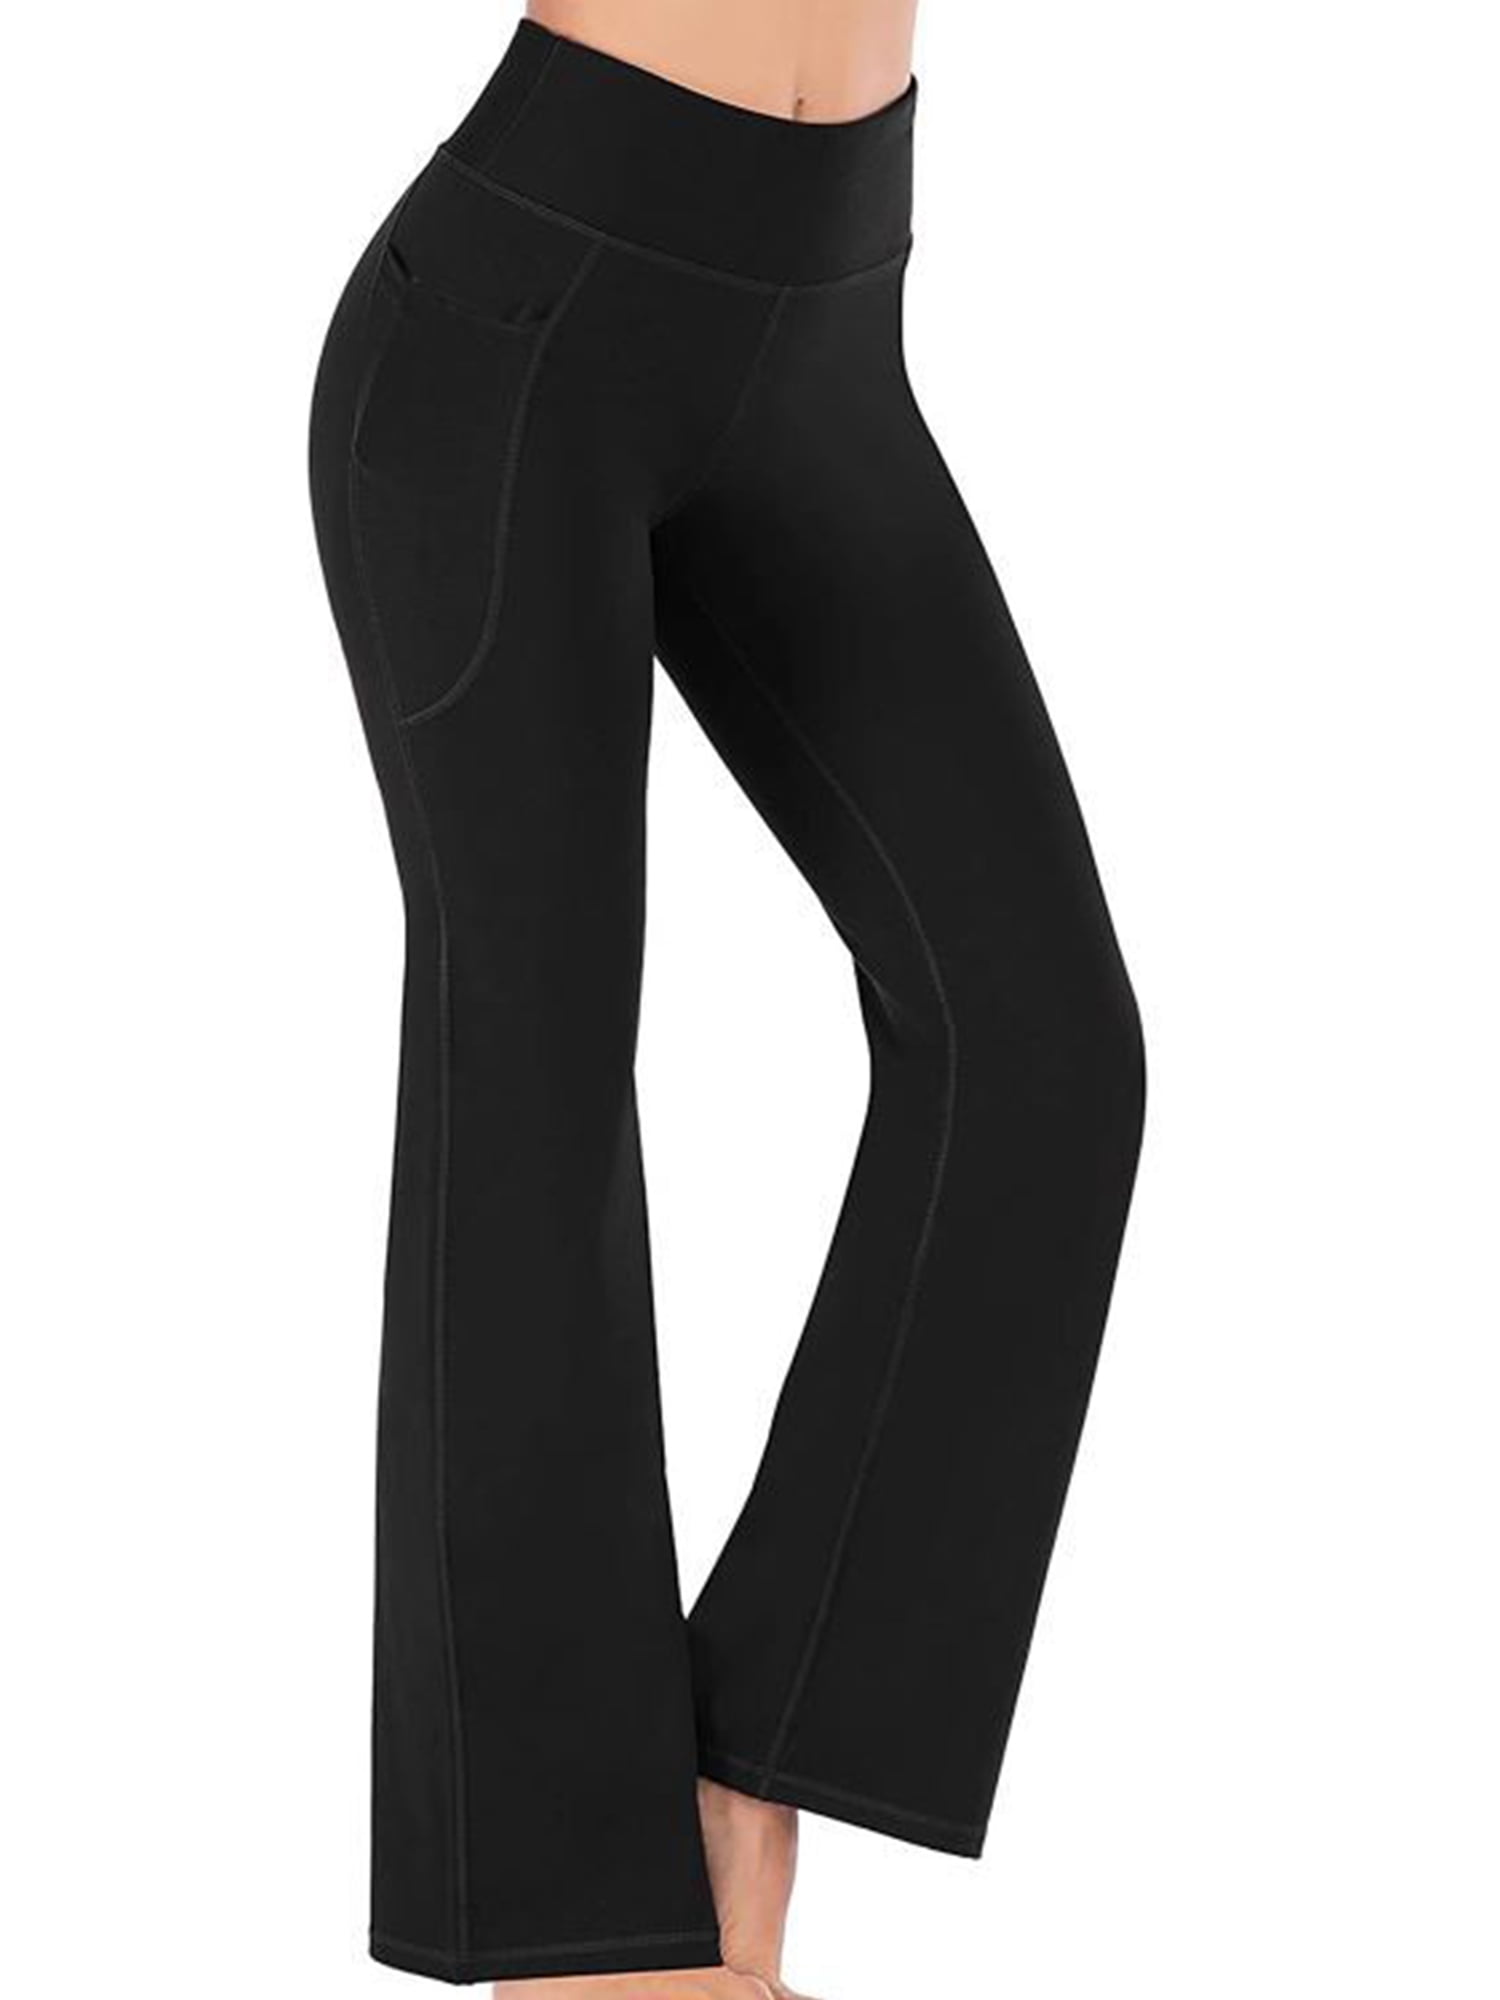 Details about   Womens High Waist Yoga Pants Flare Wide Leg Gym Sport Bootcut Fitness Trousers 